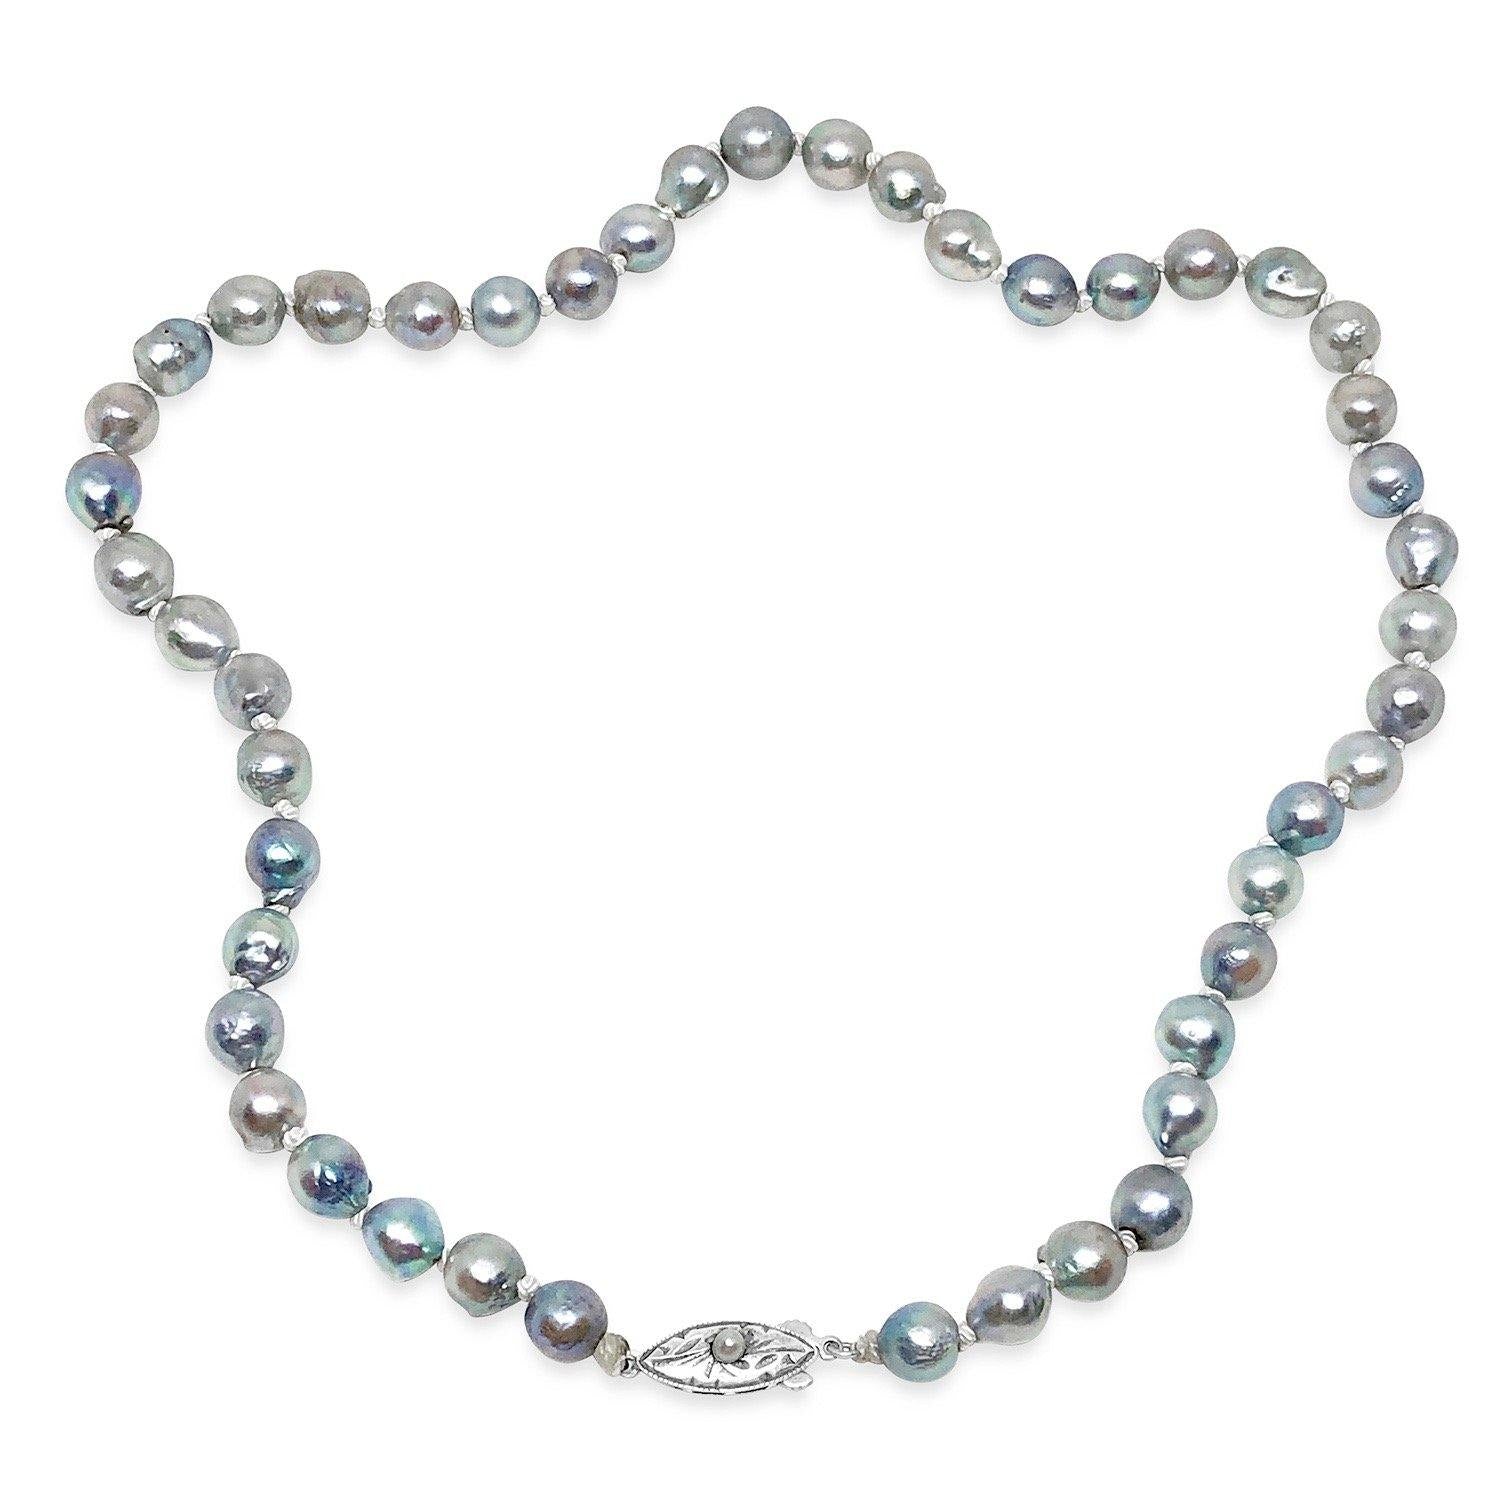 Antique Engraved Japanese Saltwater Cultured Blue Akoya Pearl Necklace - Sterling Silver